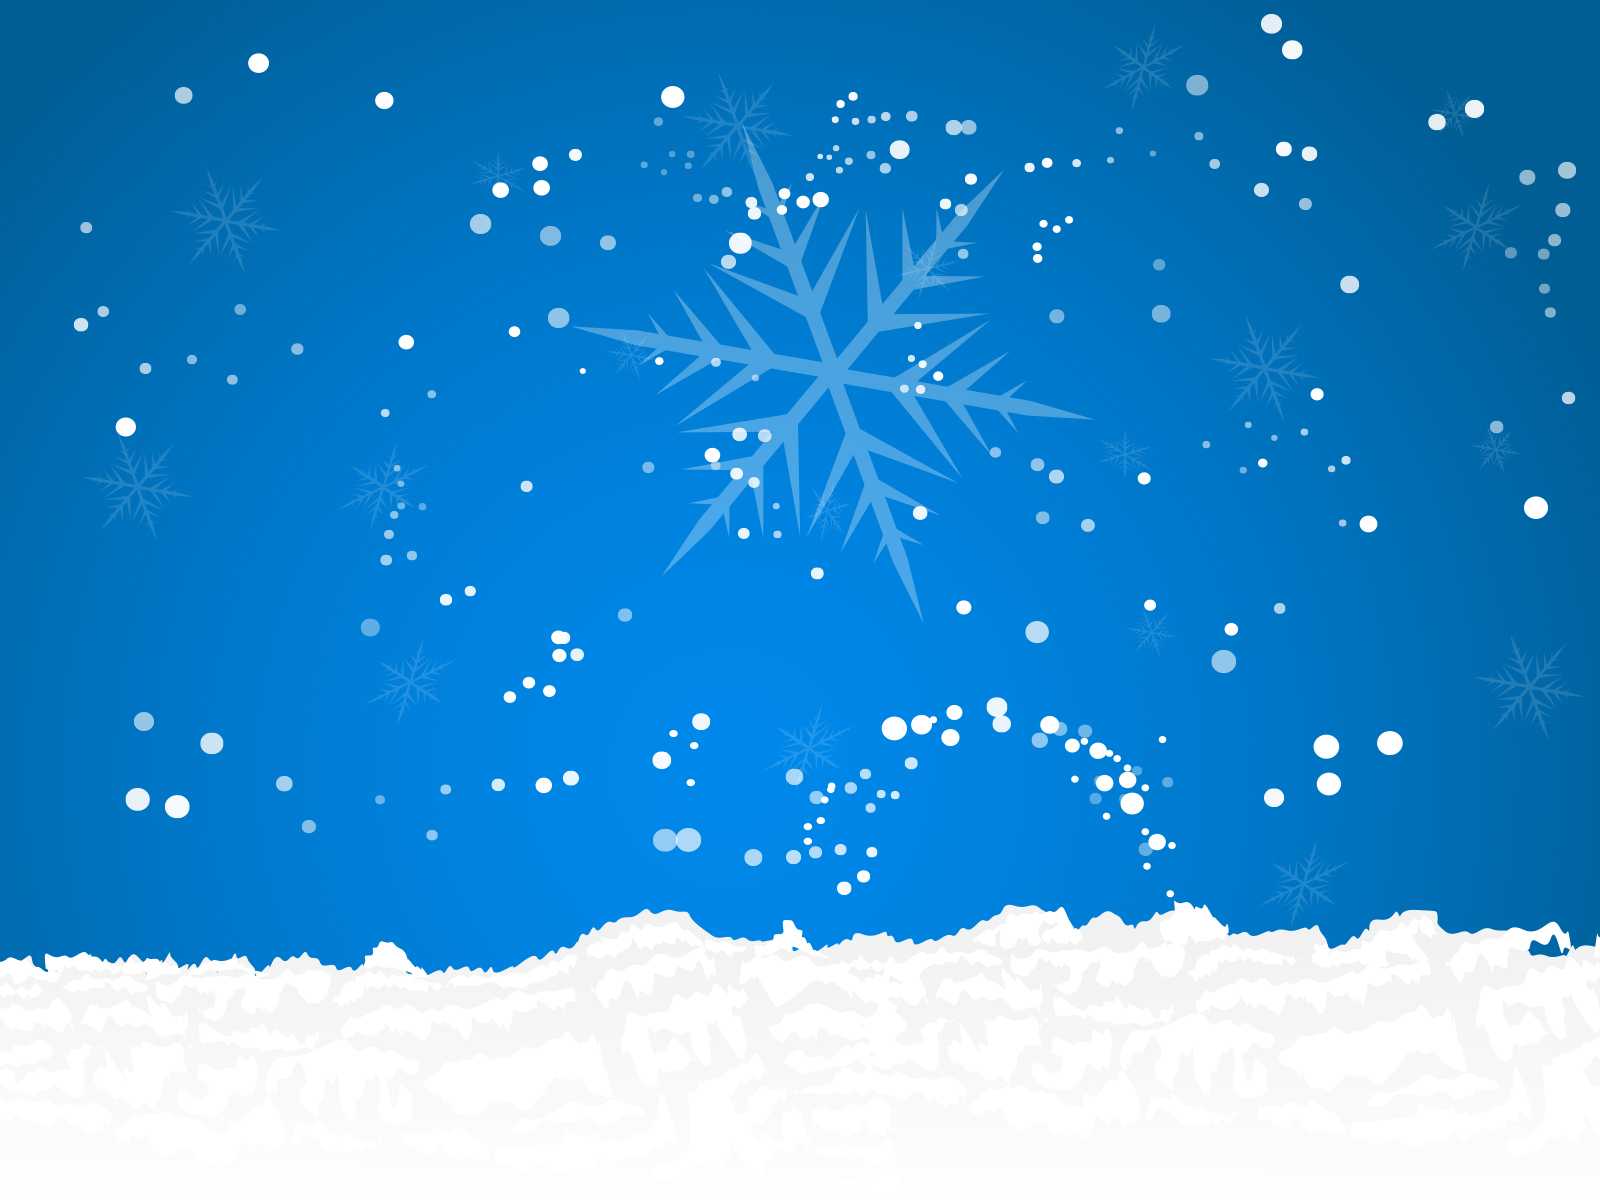 Snow Powerpoint - Free Ppt Backgrounds And Templates For Snow Powerpoint Template